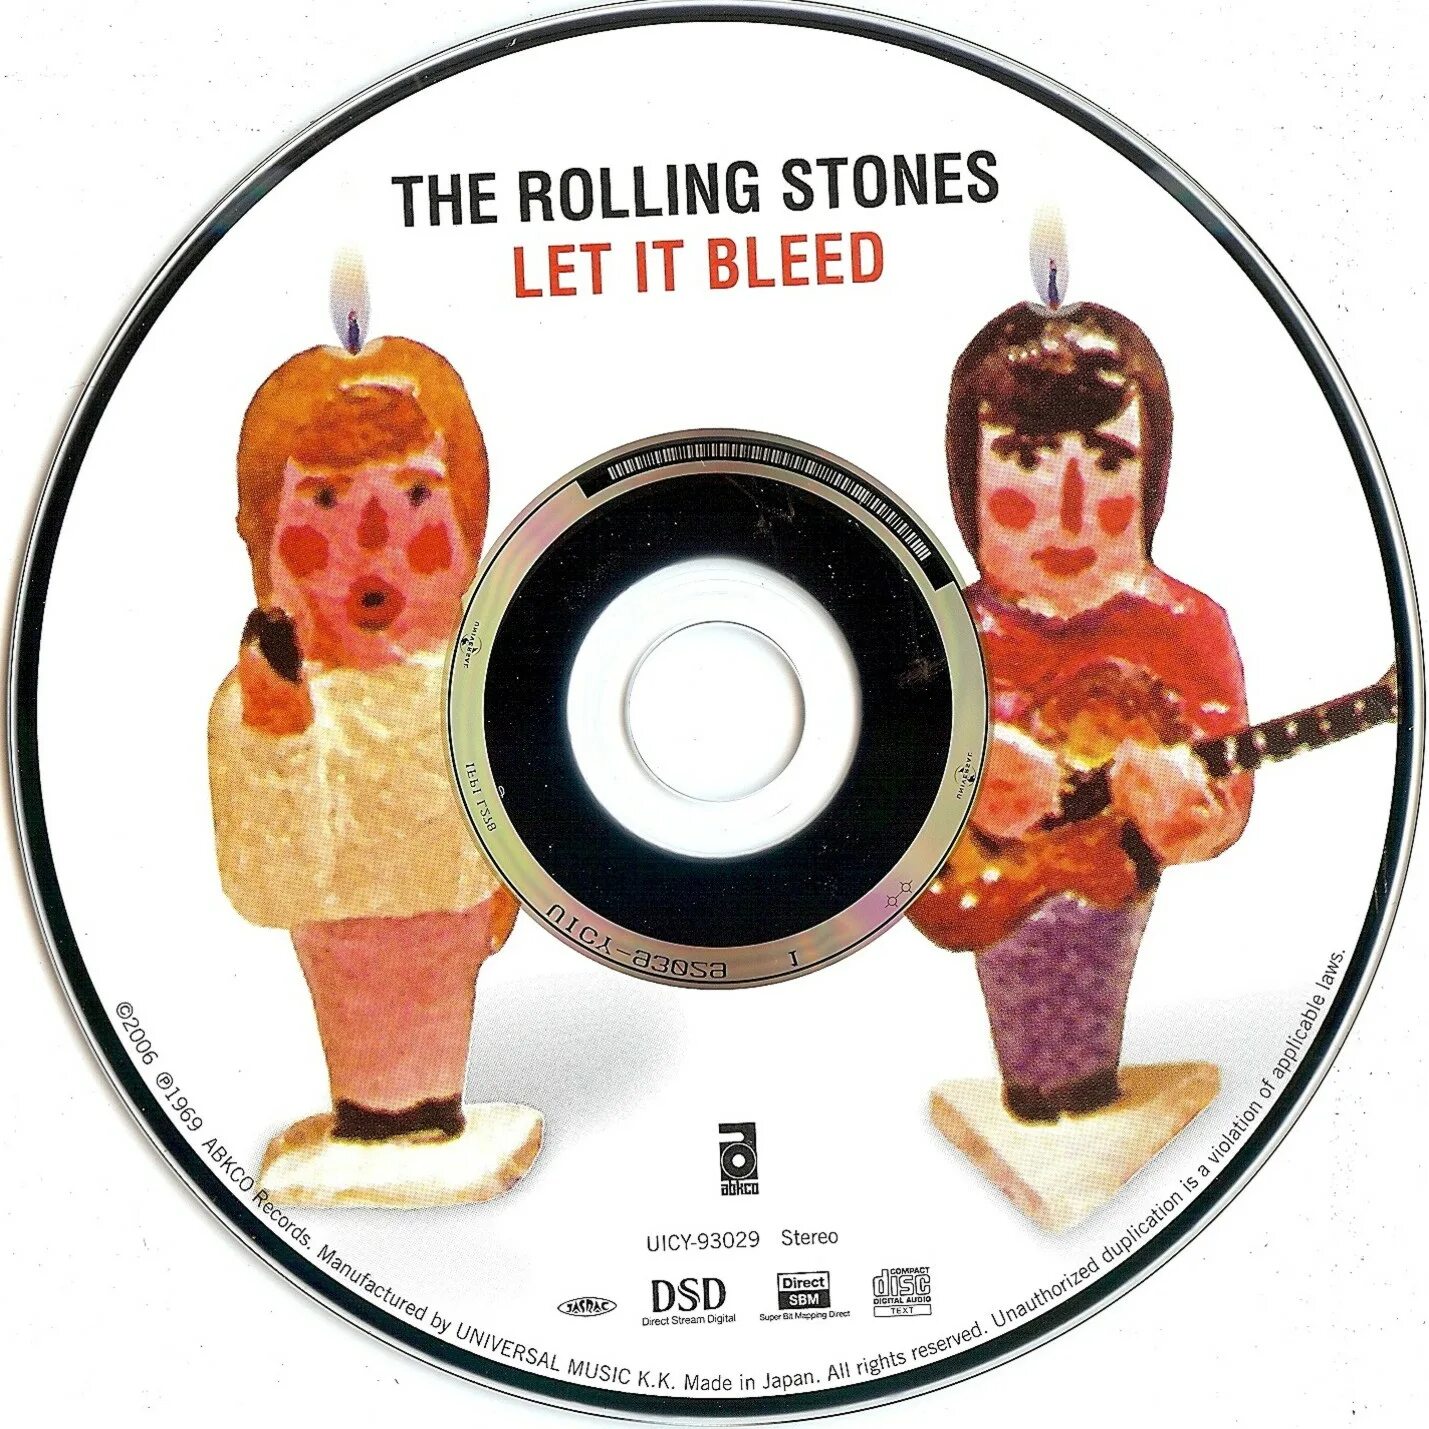 Mess it up the rolling. Rolling Stones 1969. The Rolling Stones Let it Bleed 1969. Роллинг стоунз альбом 1969. Let it Bleed the Rolling Stones альбом.